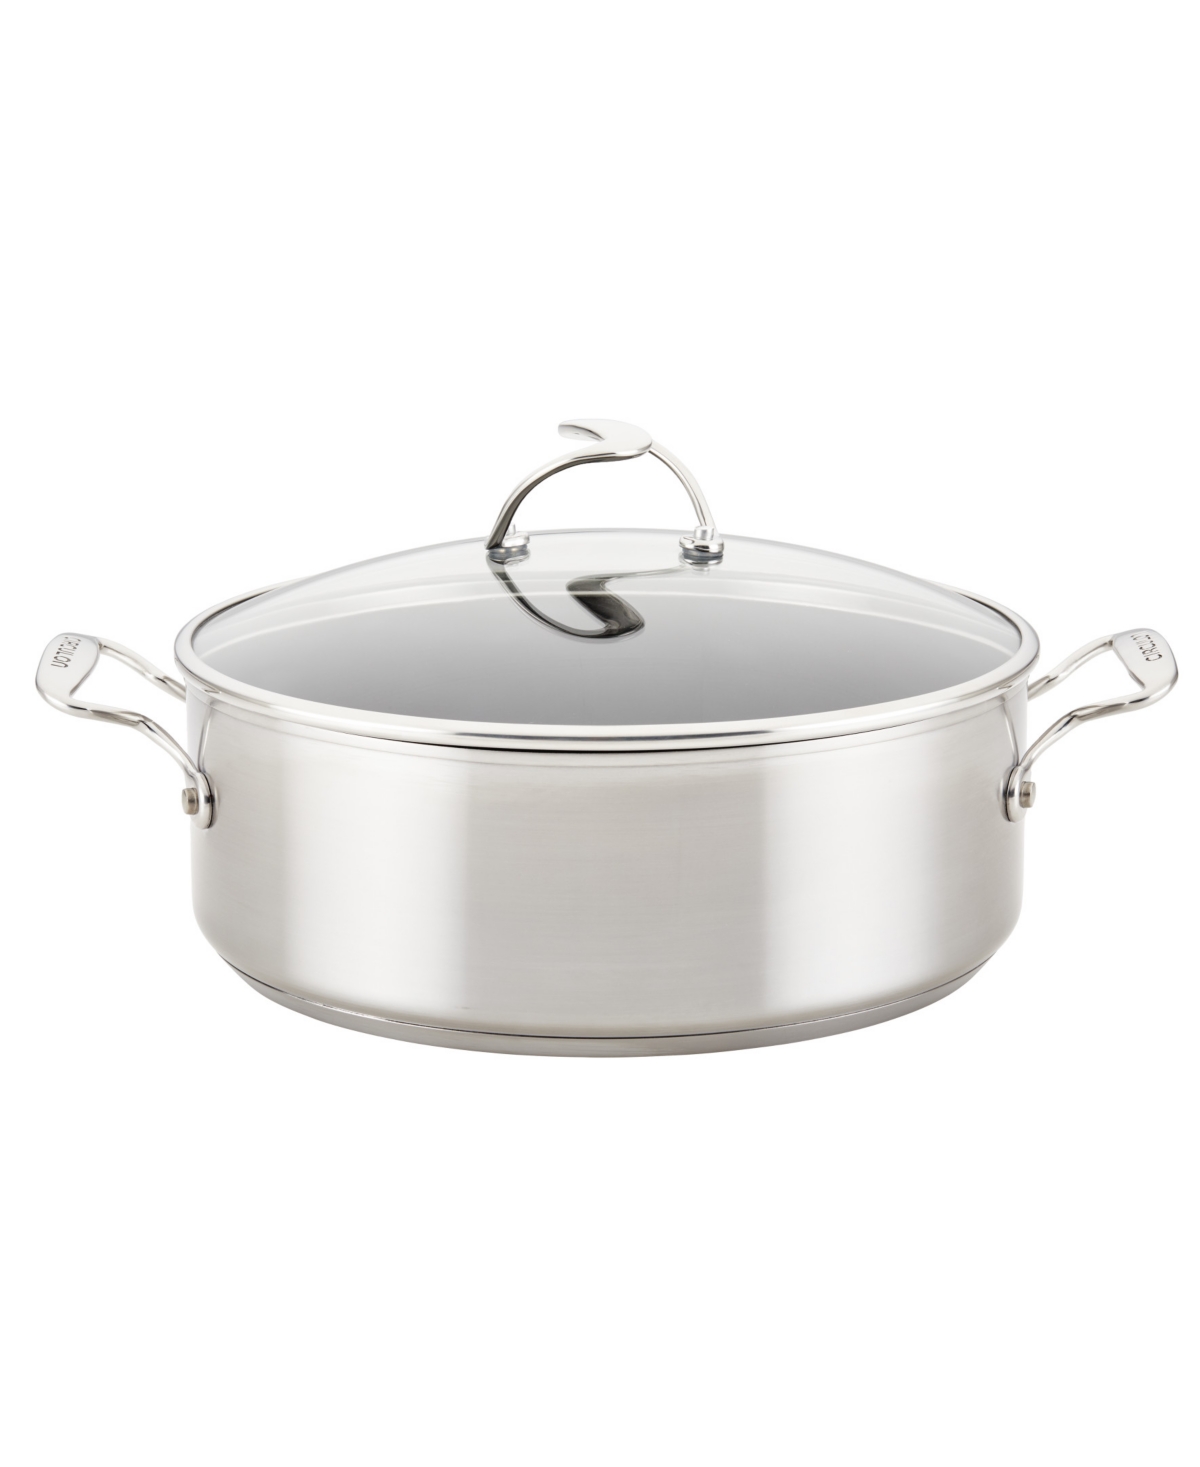 Circulon Steelshield Nonstick Stainless Steel Induction 7.5 Quart Stockpot With Lid